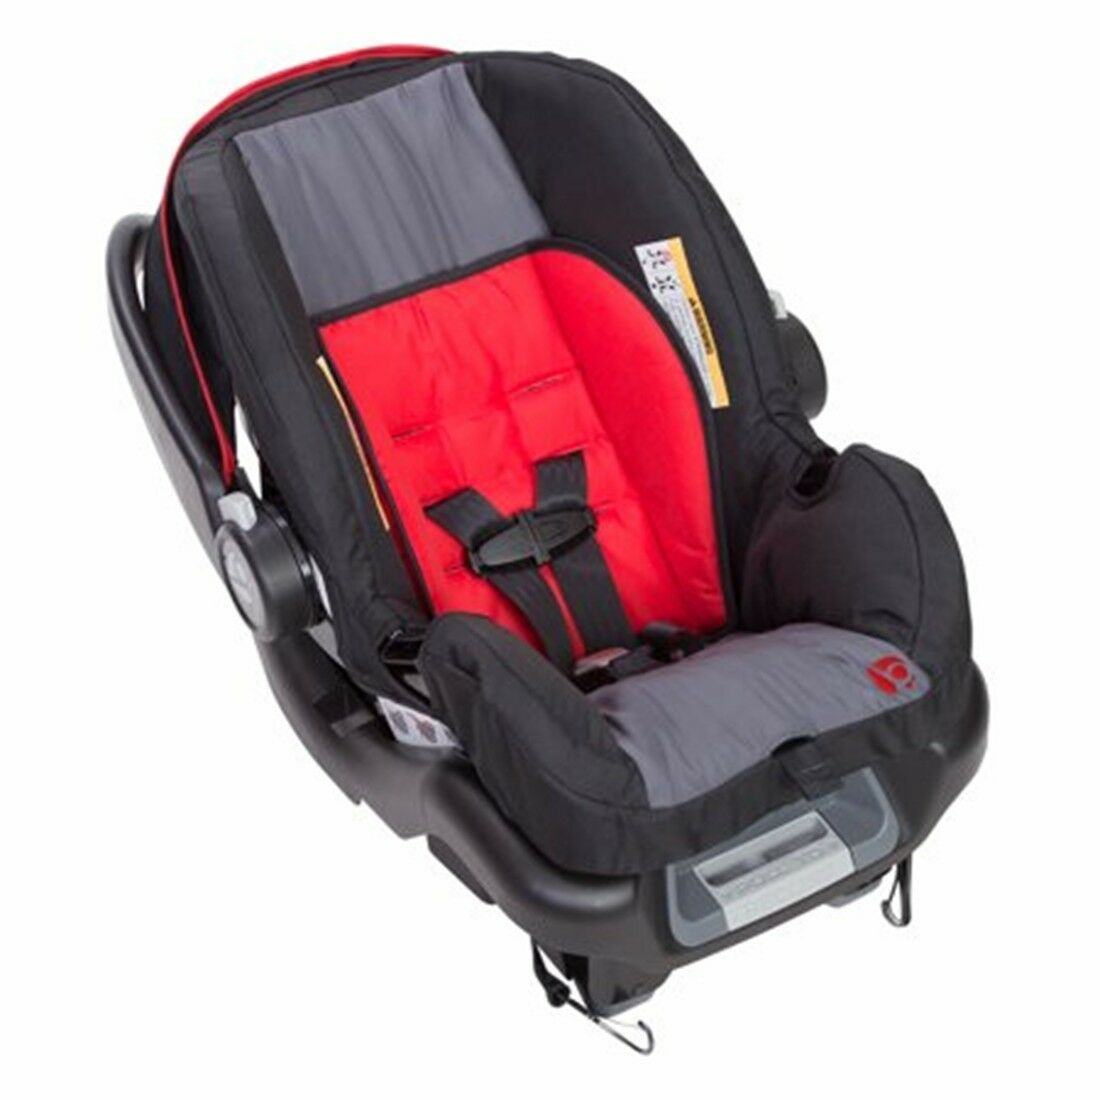 Baby Trend Sit n Stand Double Stroller with One Car Seat Combo Set Red/Black